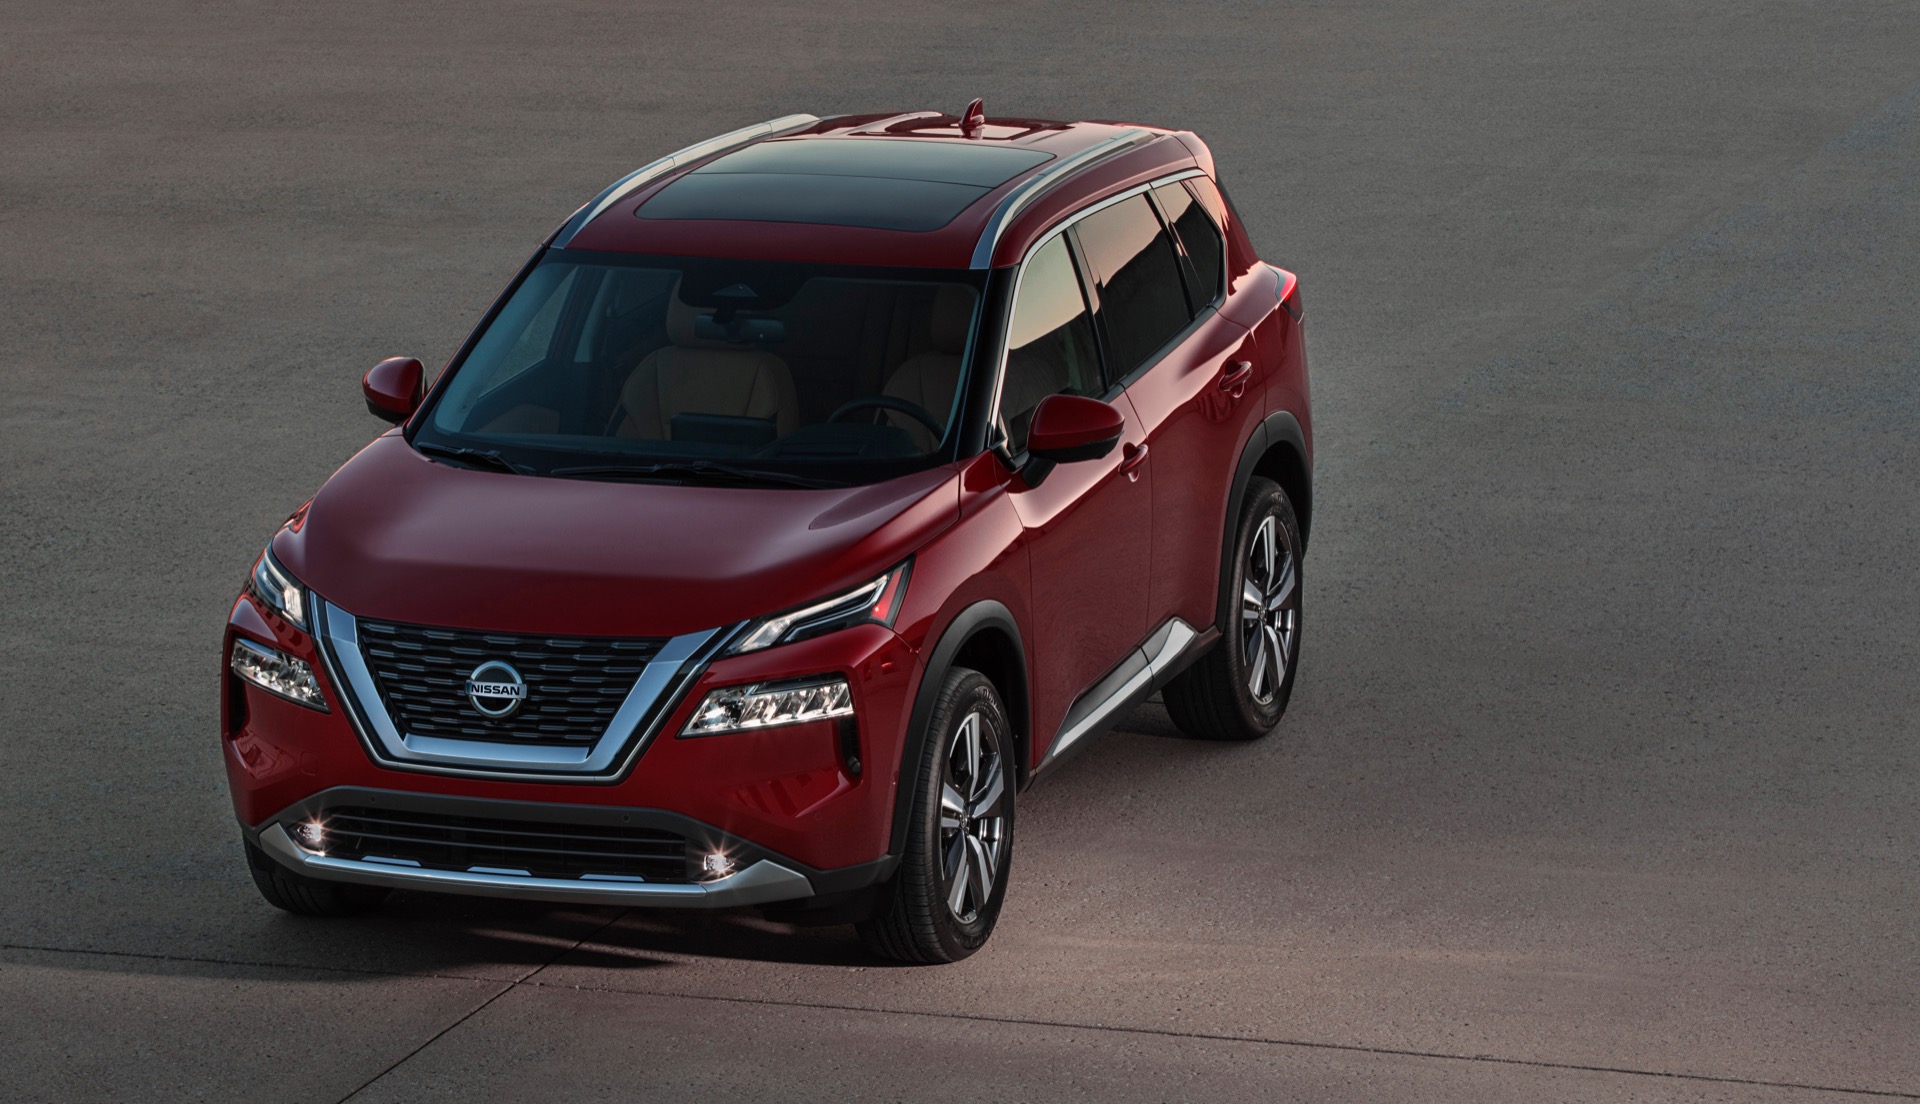 2021 Nissan Rogue bows with premium look and features